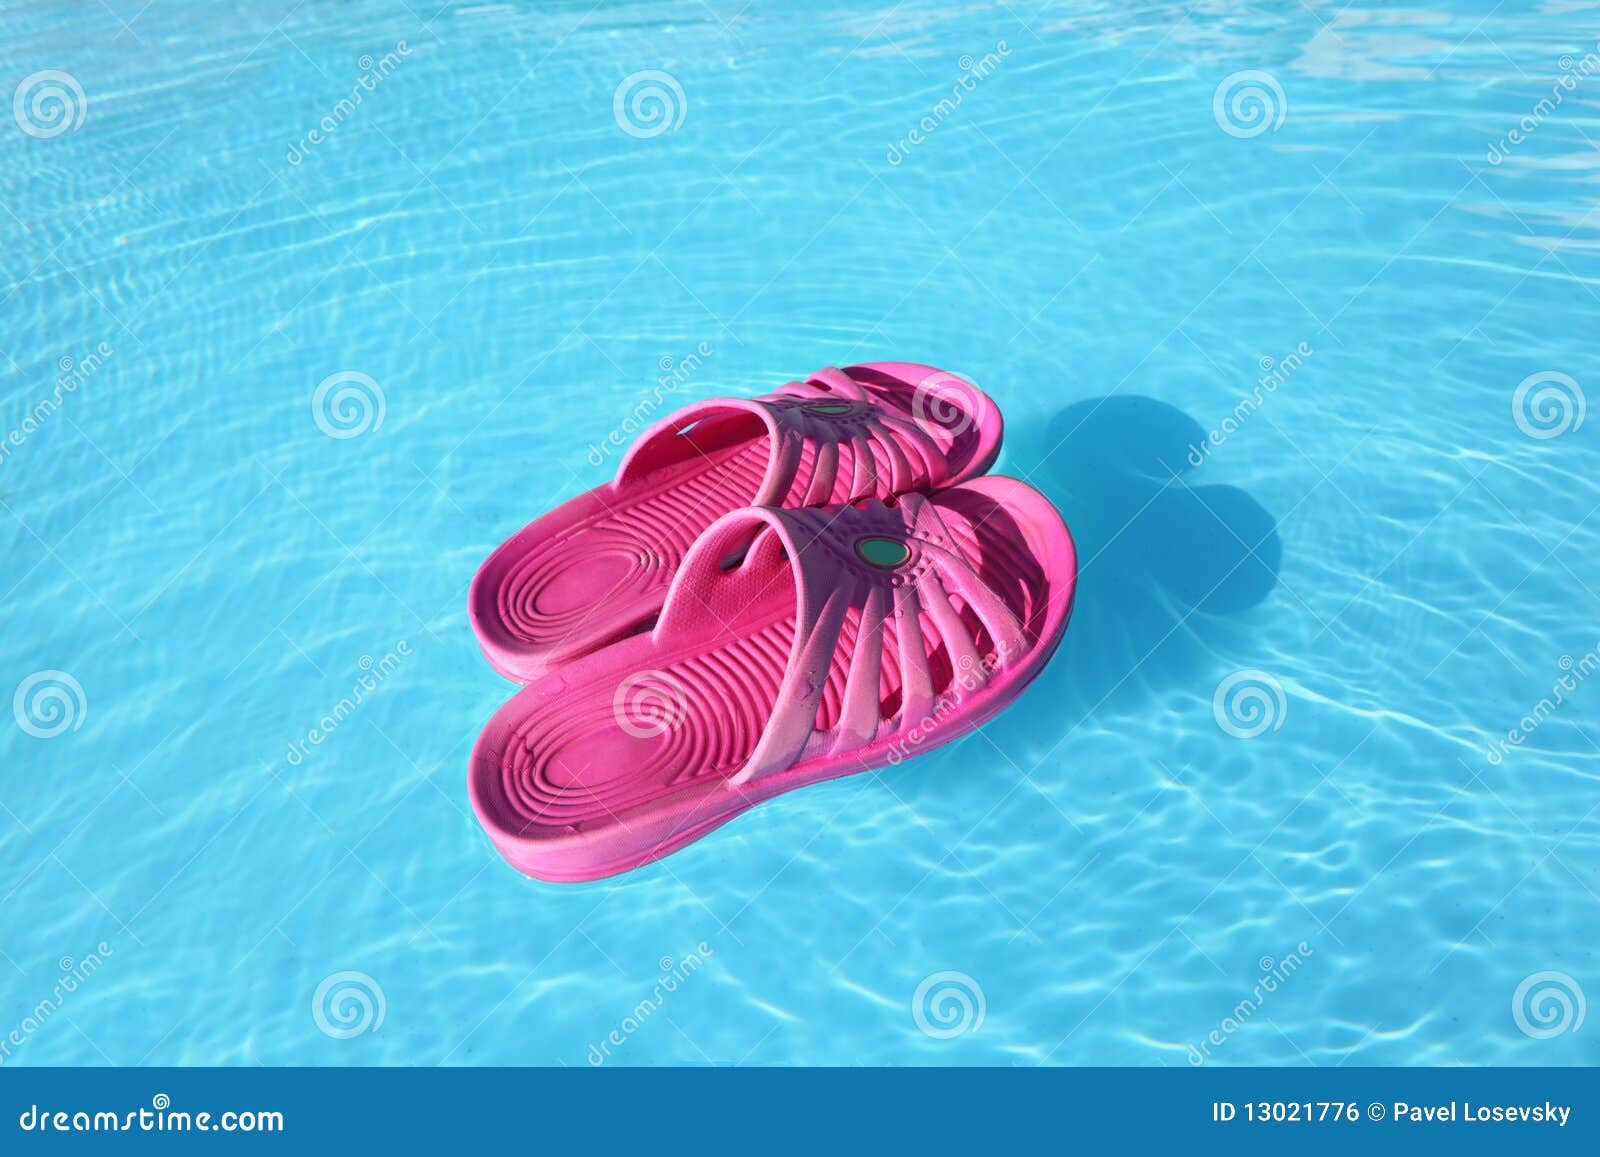 Beach Slippers Swimming on Water Stock Photo - Image of sandal, idea: